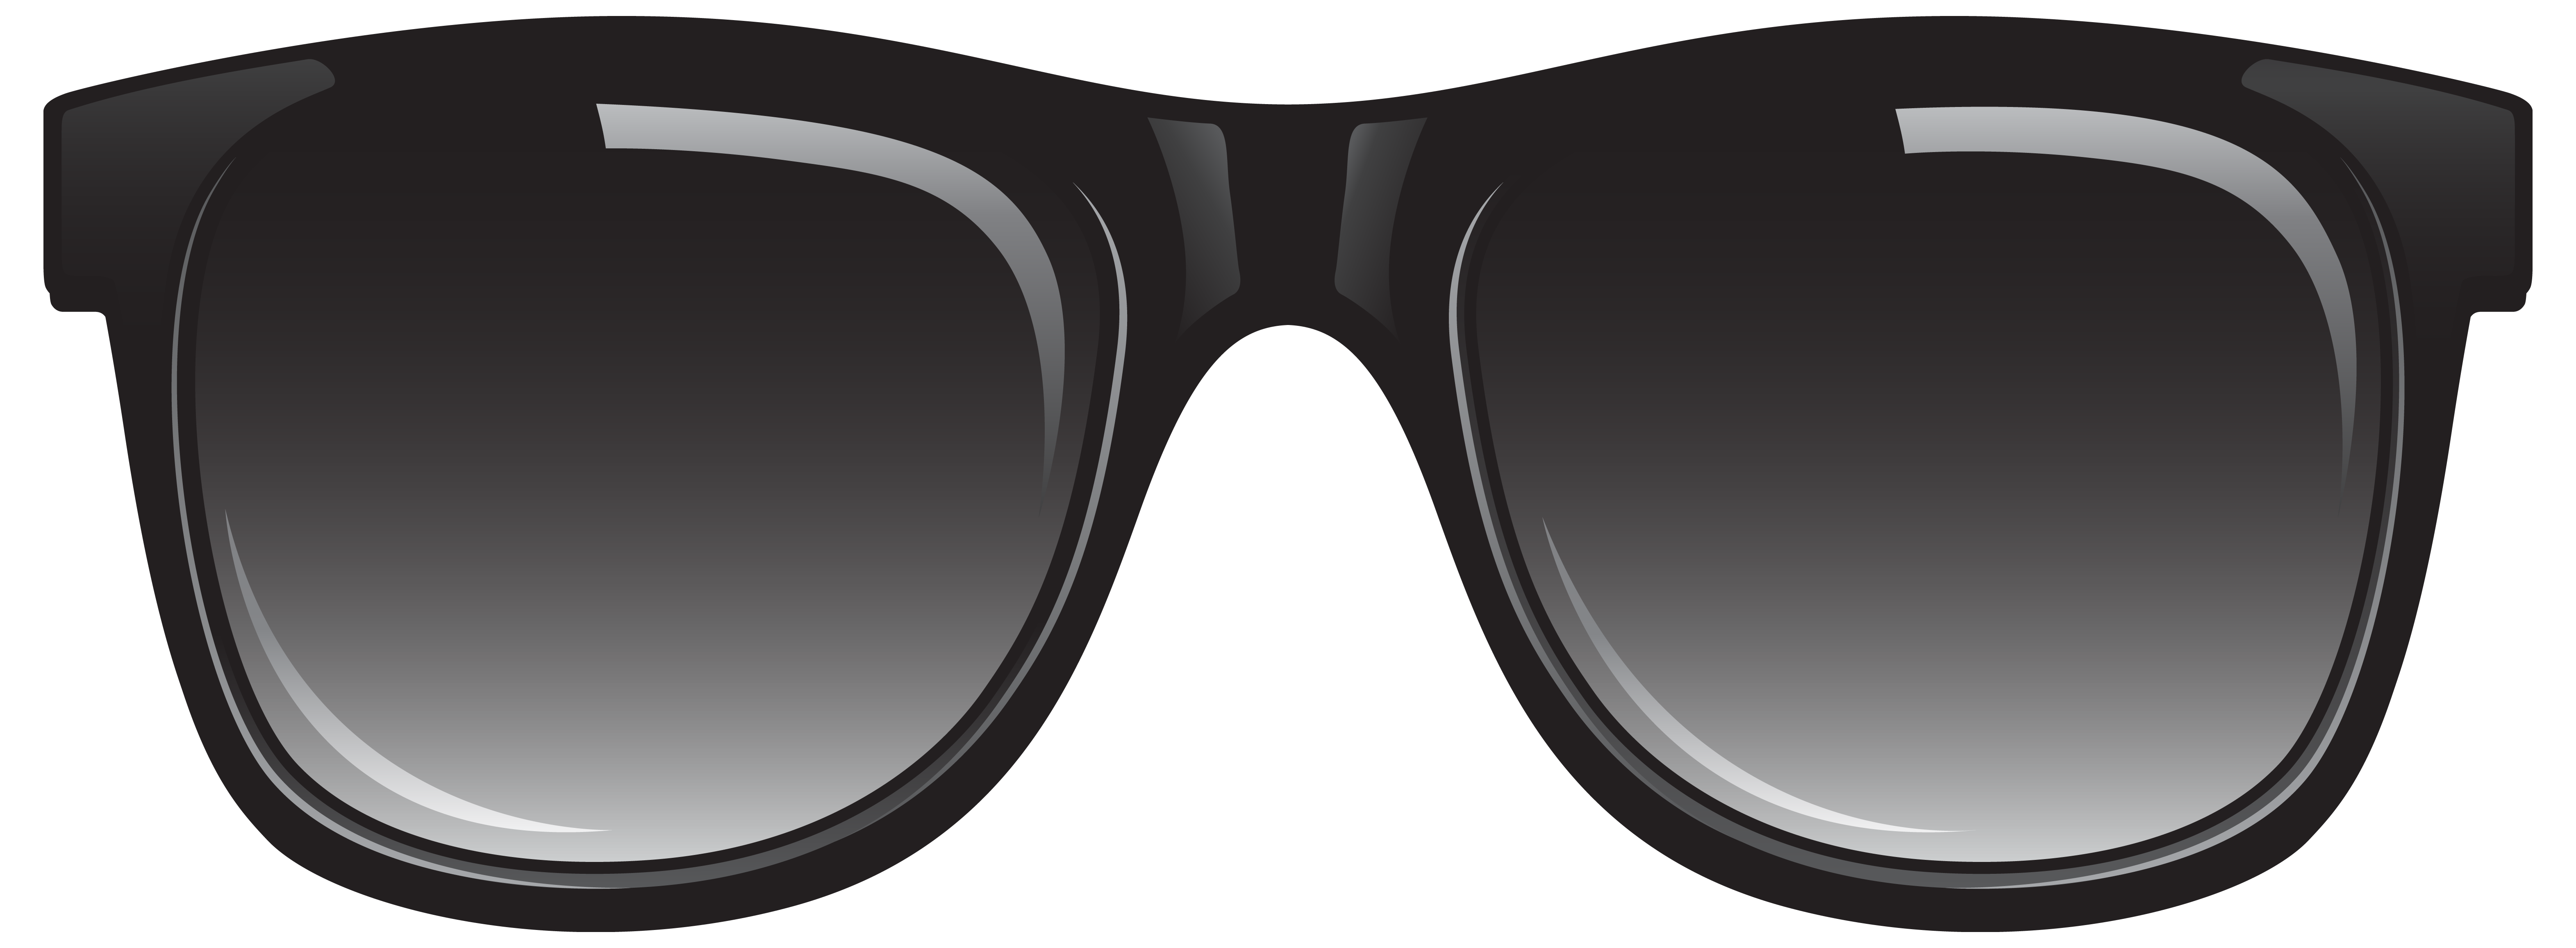 Free Transparent Background Sunglasses, Download Free Clip